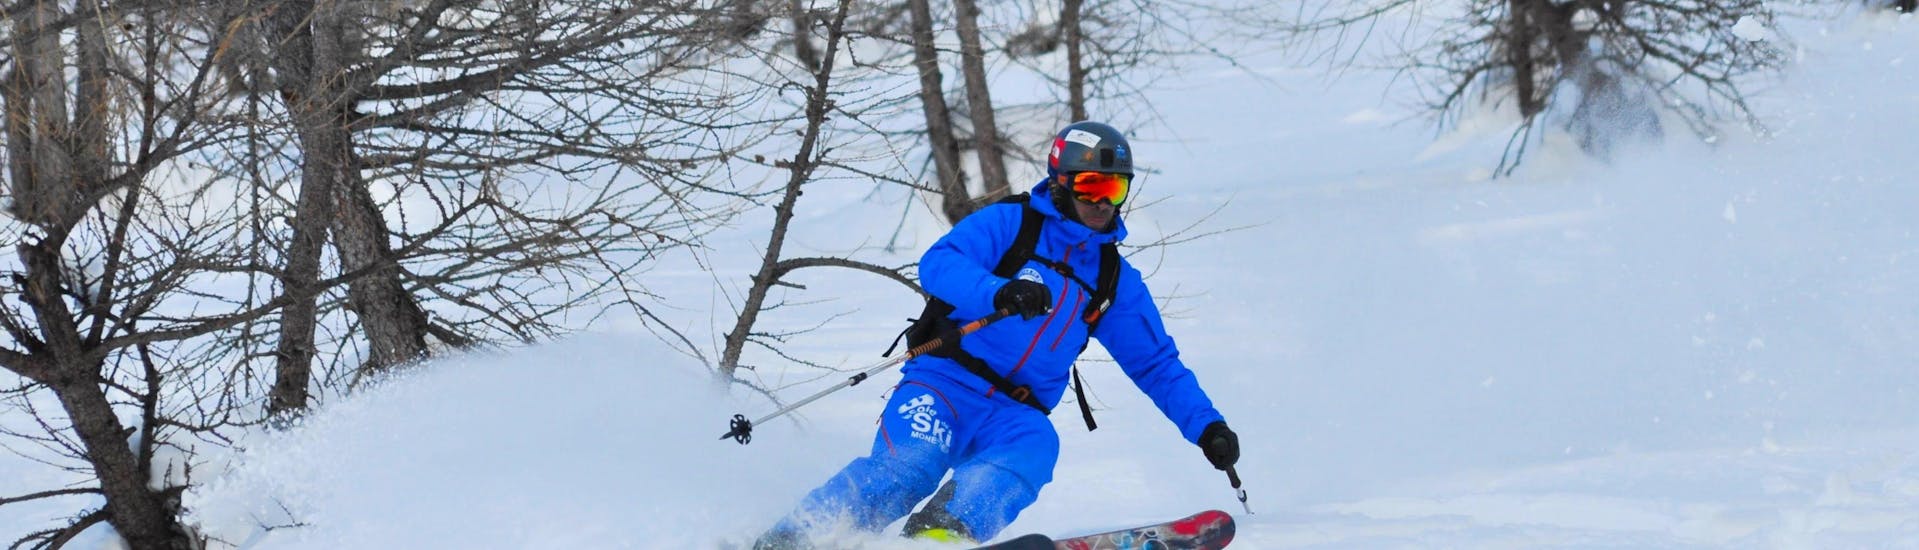 off-piste-skiing-lessons-15-25-years-all-levels-esi-monetier-hero